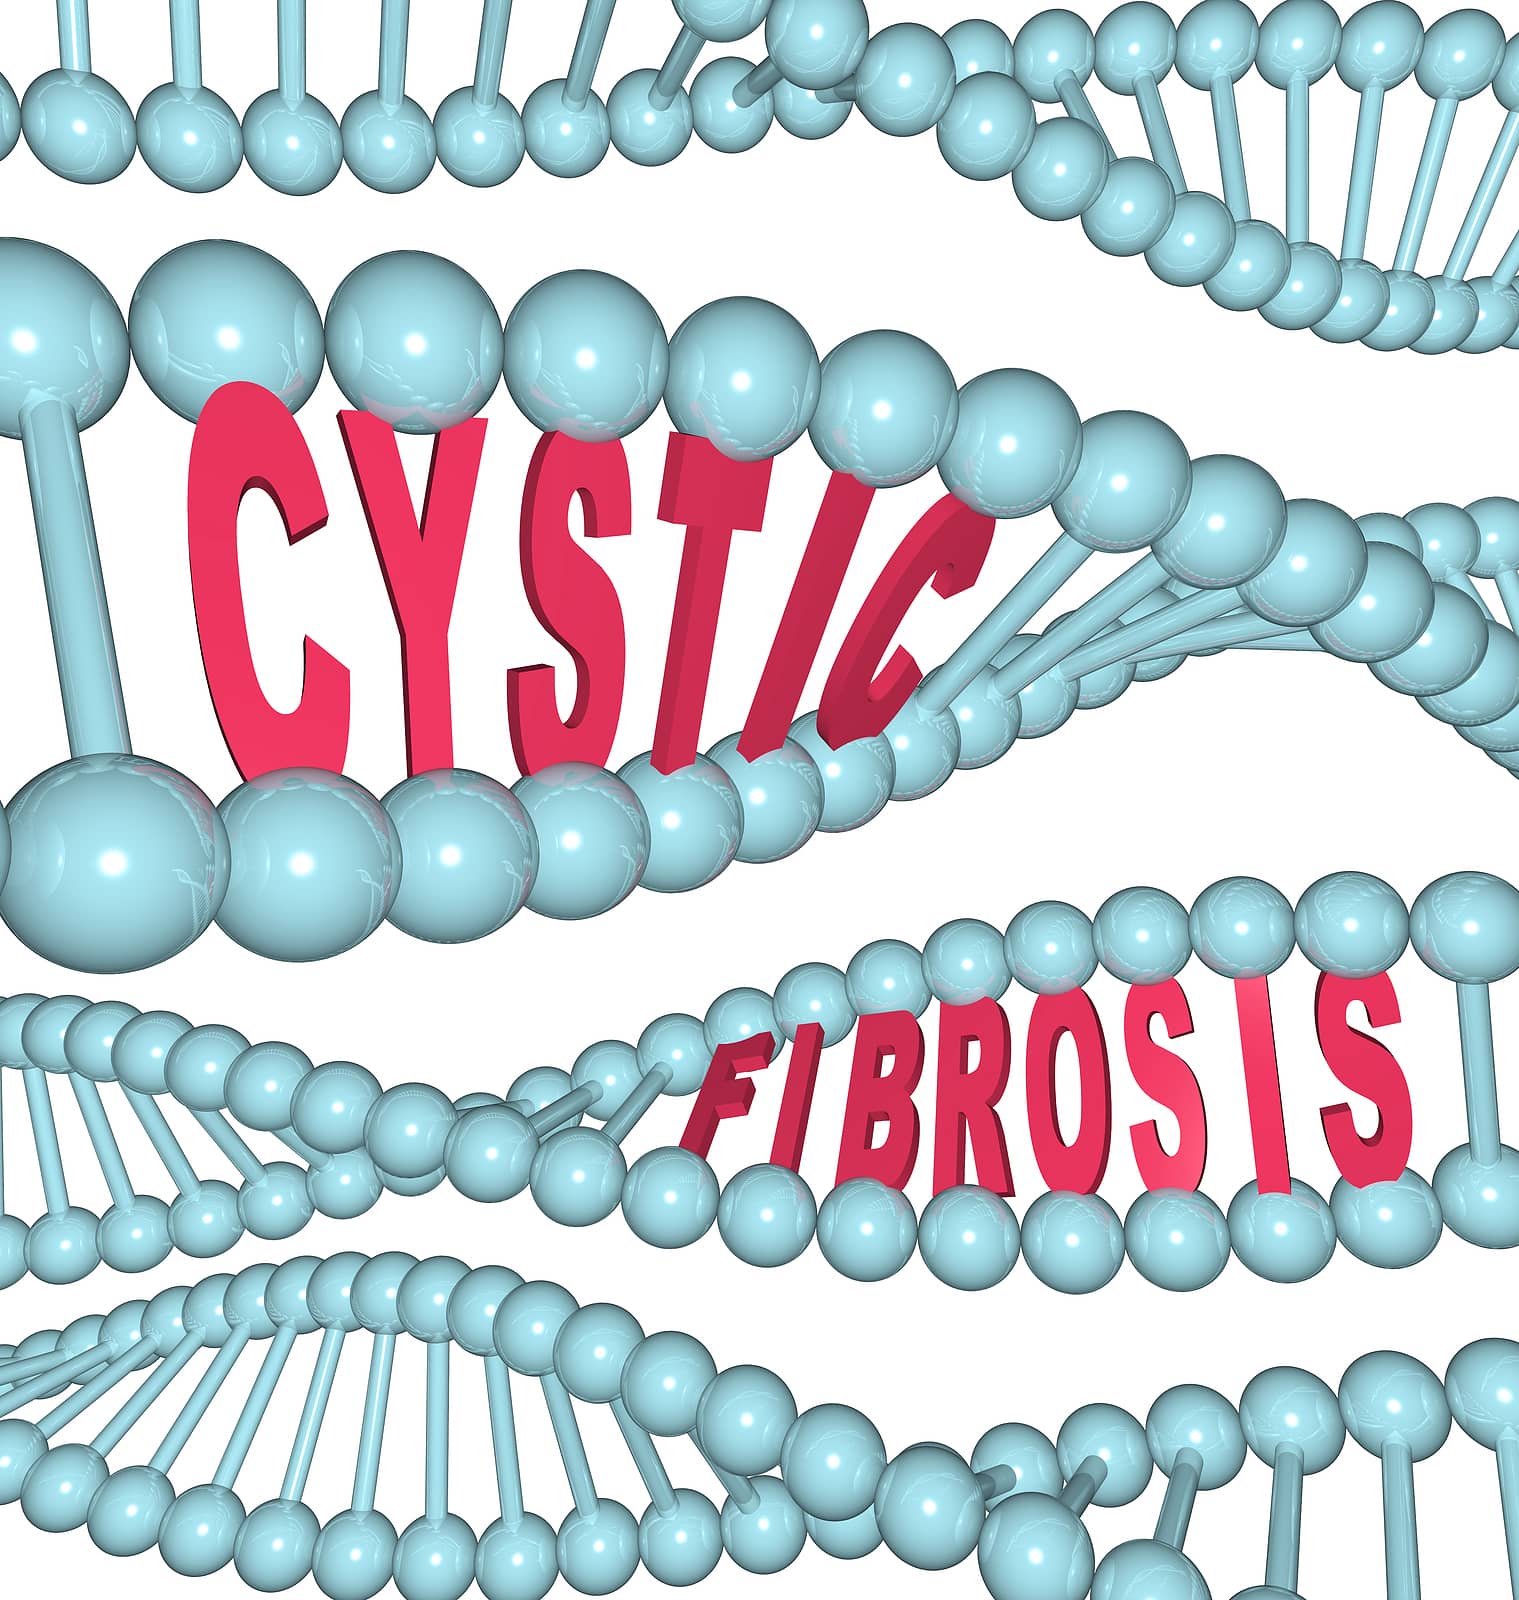 Medicare Coverage for Cystic Fibrosis